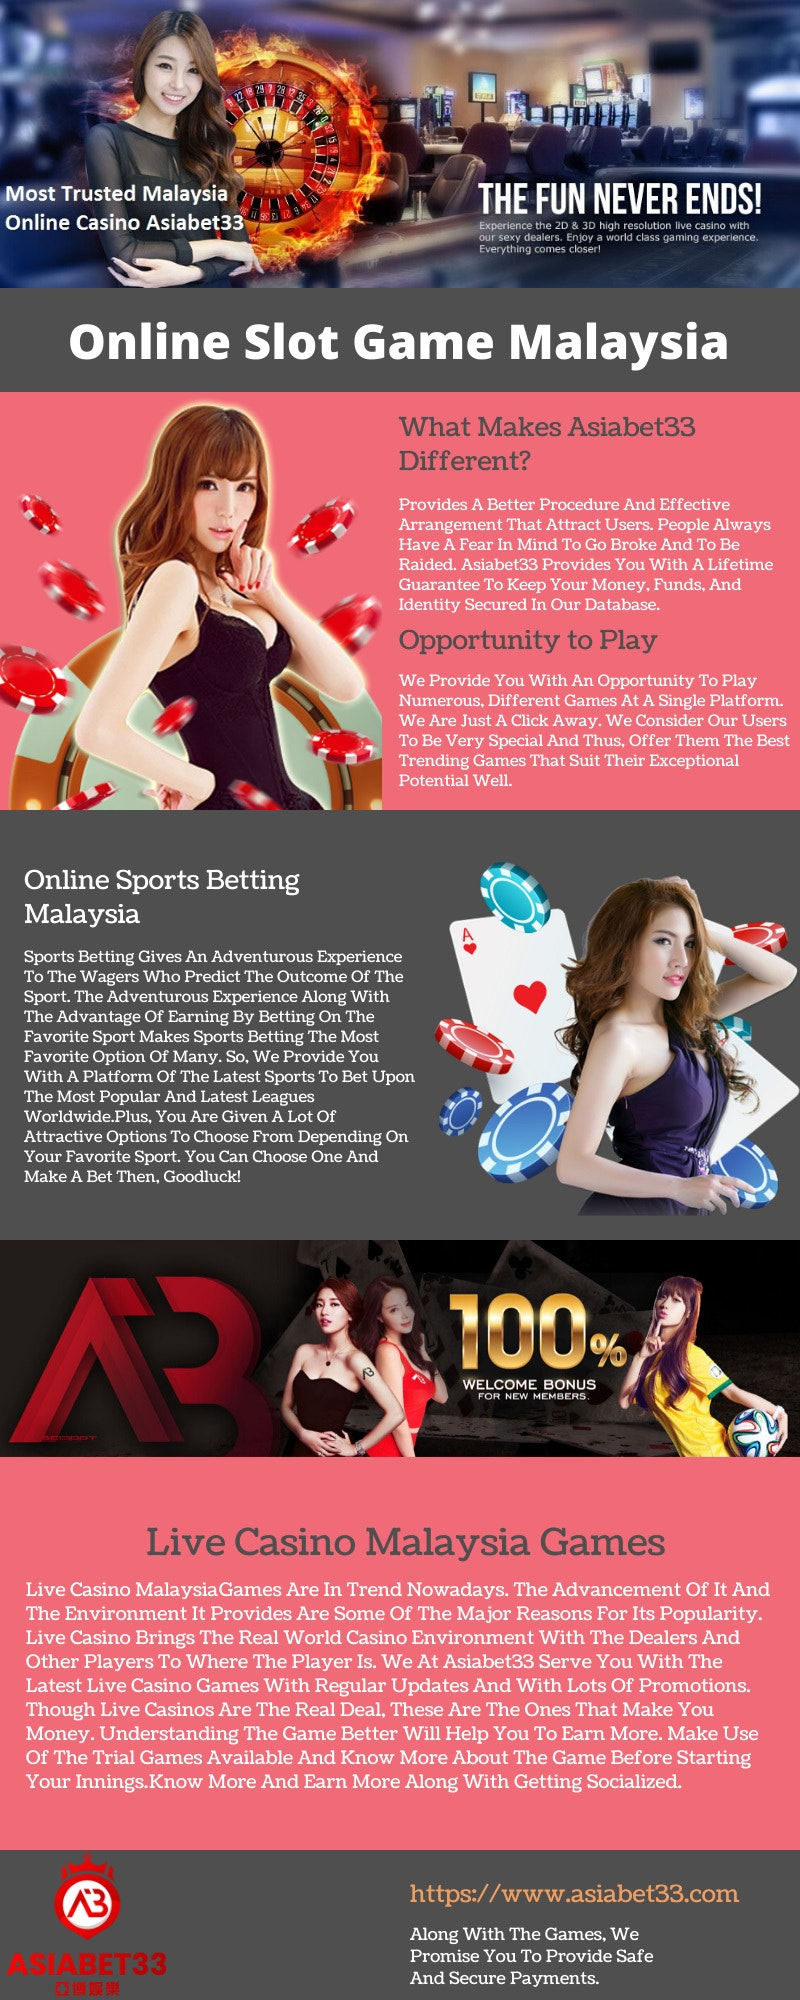 Most Trusted Malaysia Online Casino